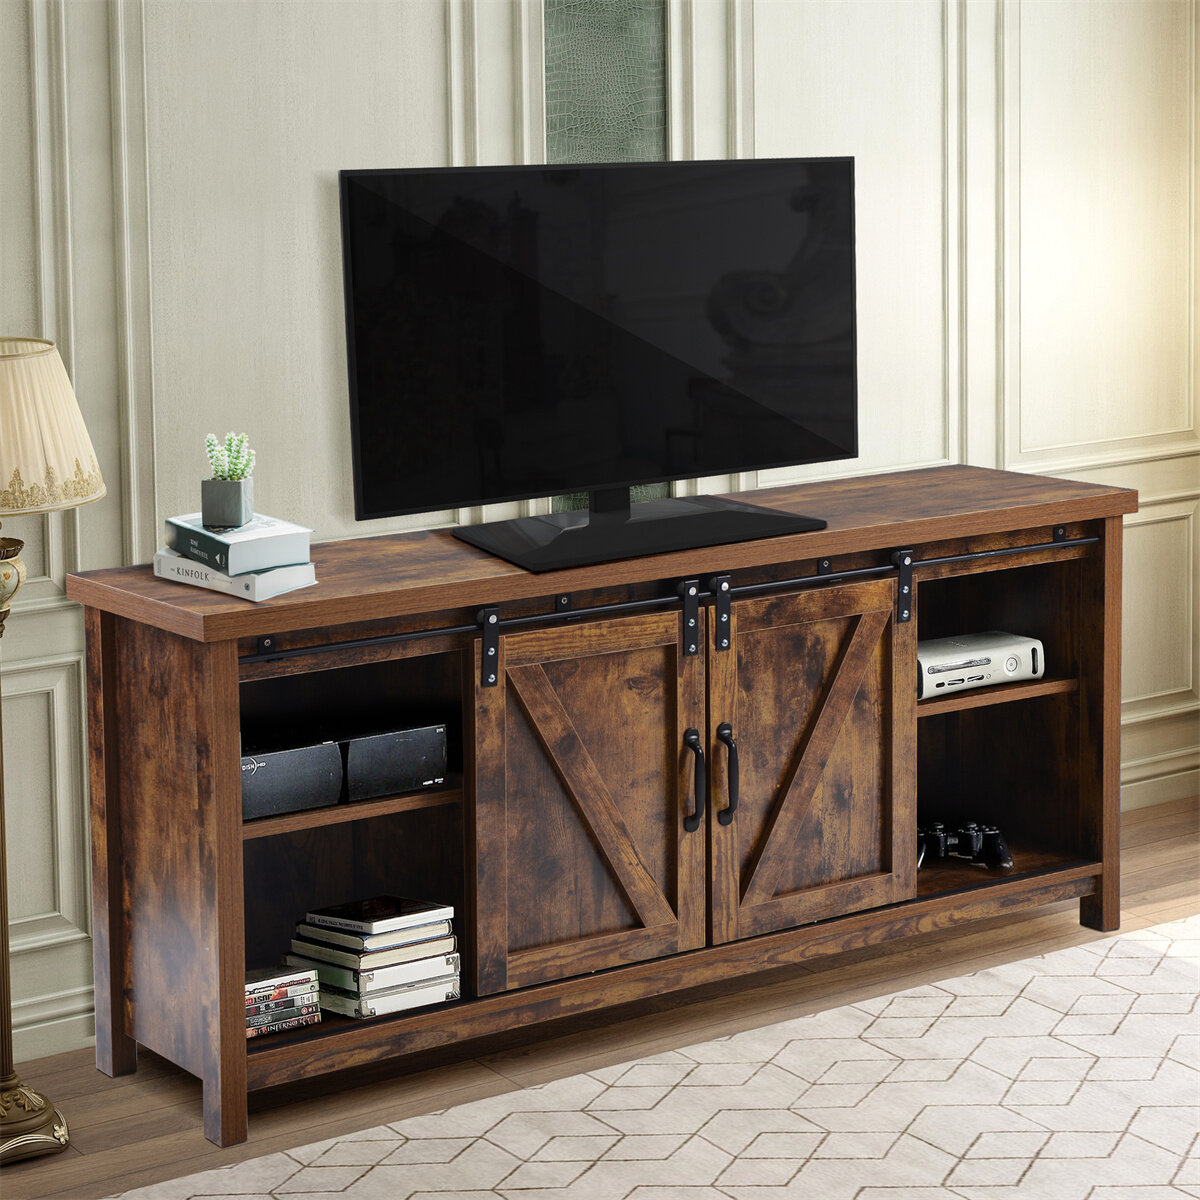 Details about   TV Stand Black For 65 Inch Size Wood Storage Drawer Entertainment Center Modern 